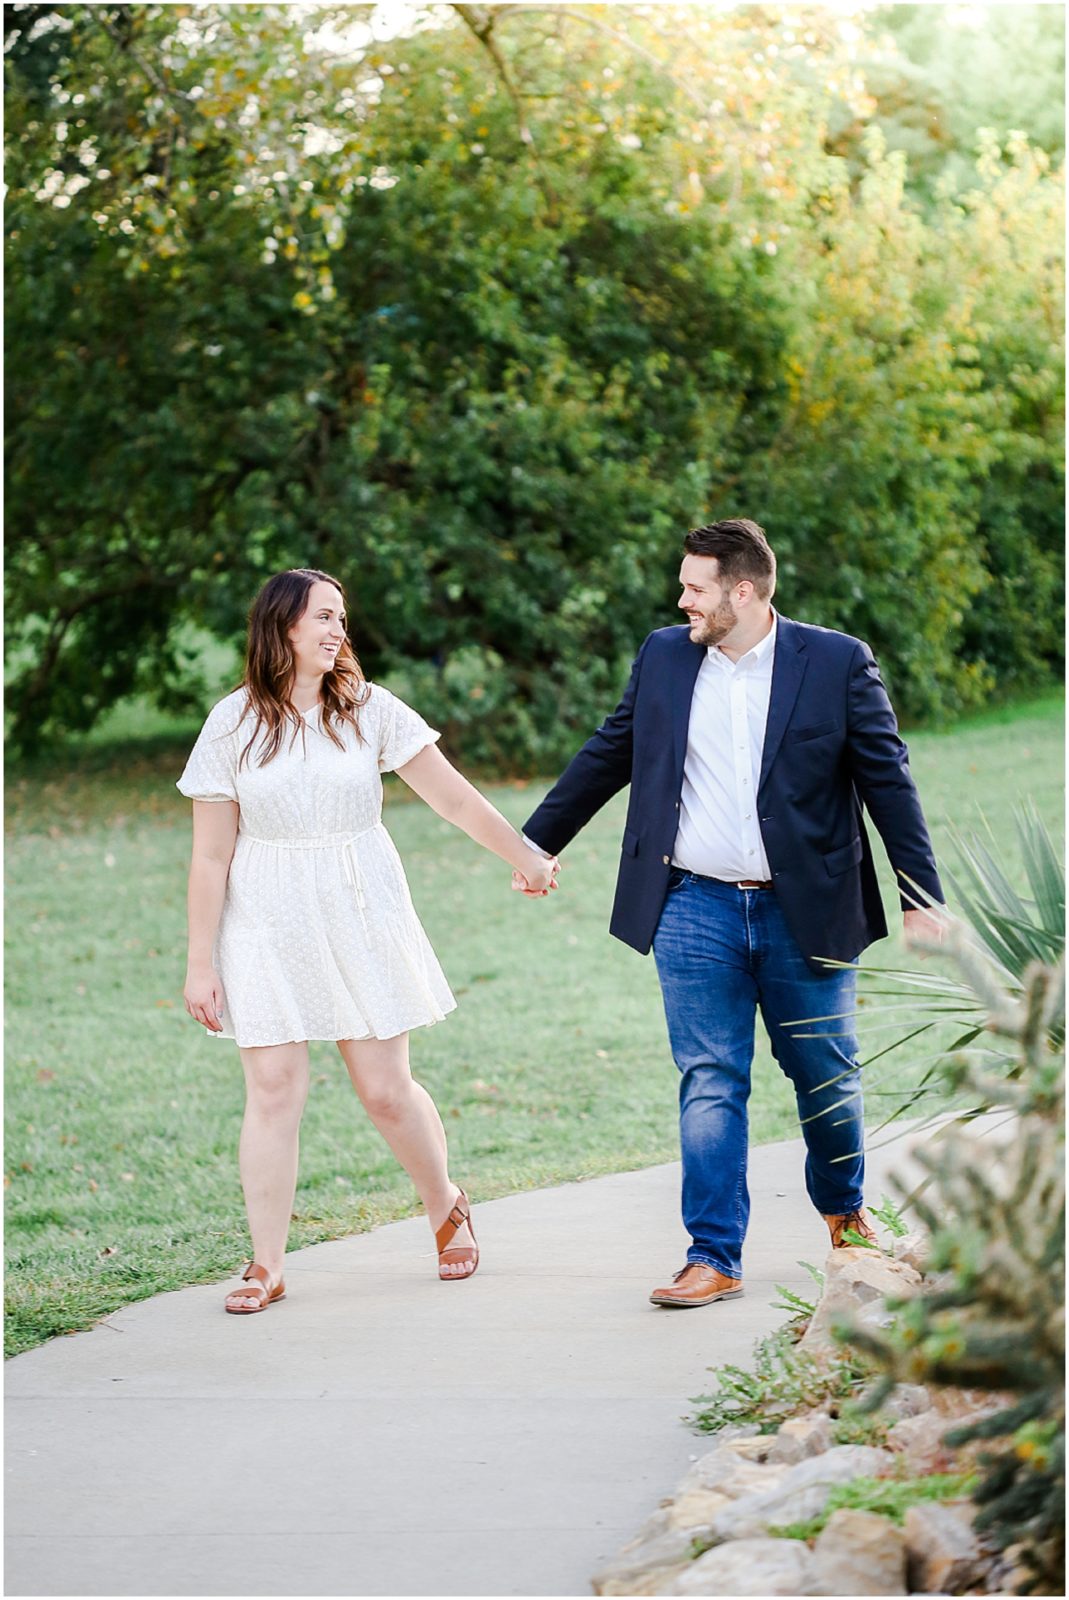 cute engagement photos in kansas city - loose park - what to wear to engagement photos